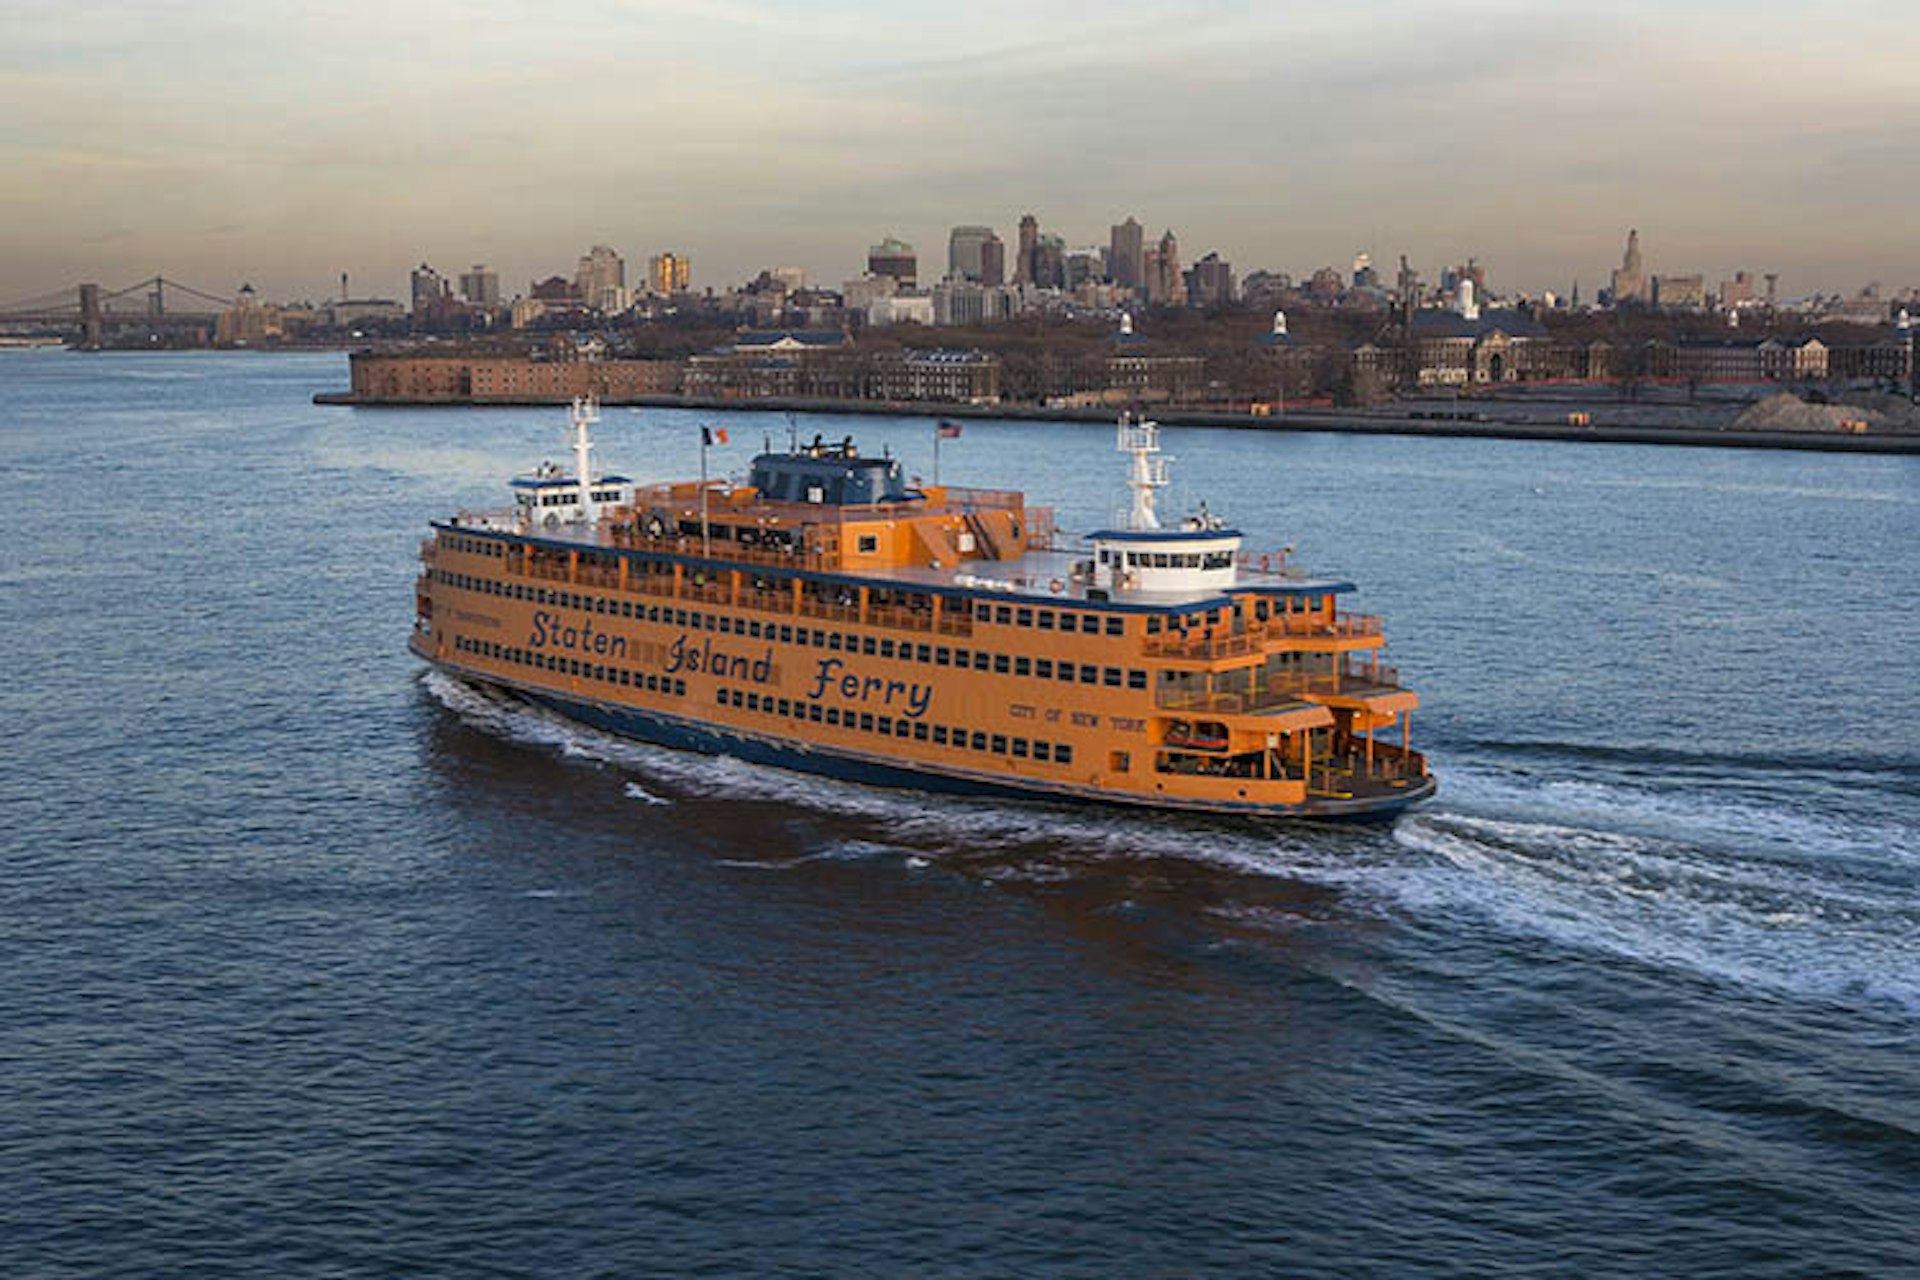 Gaze at Lady Liberty from aboard New York's iconic Staten Island ferry. Image by kworq / The Image Bank / Getty Images